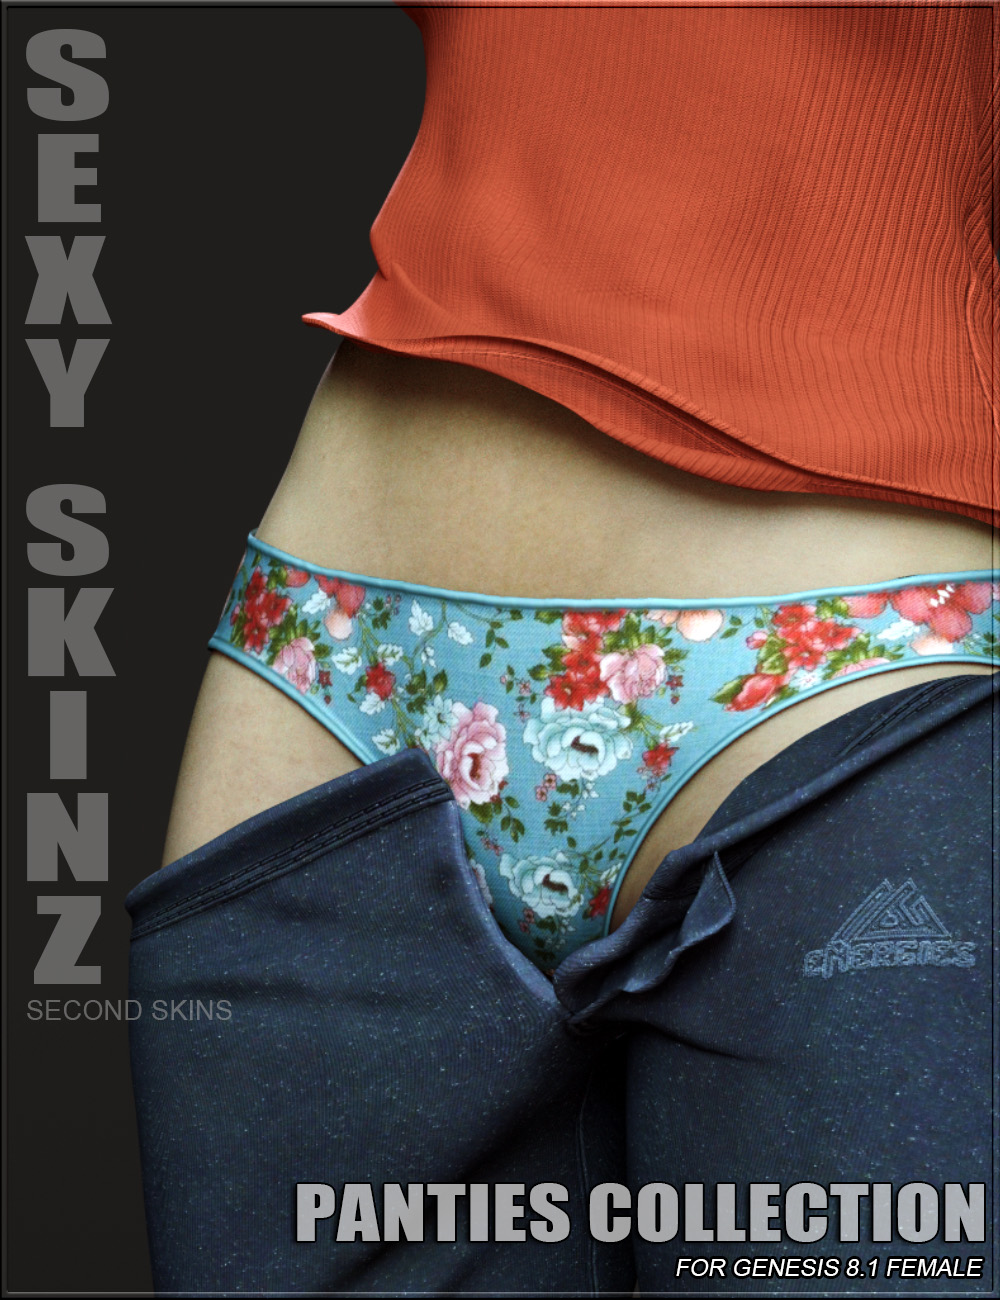 Sexy Skinz - Panties Collection for Genesis 8.1 Females by: vyktohria, 3D Models by Daz 3D